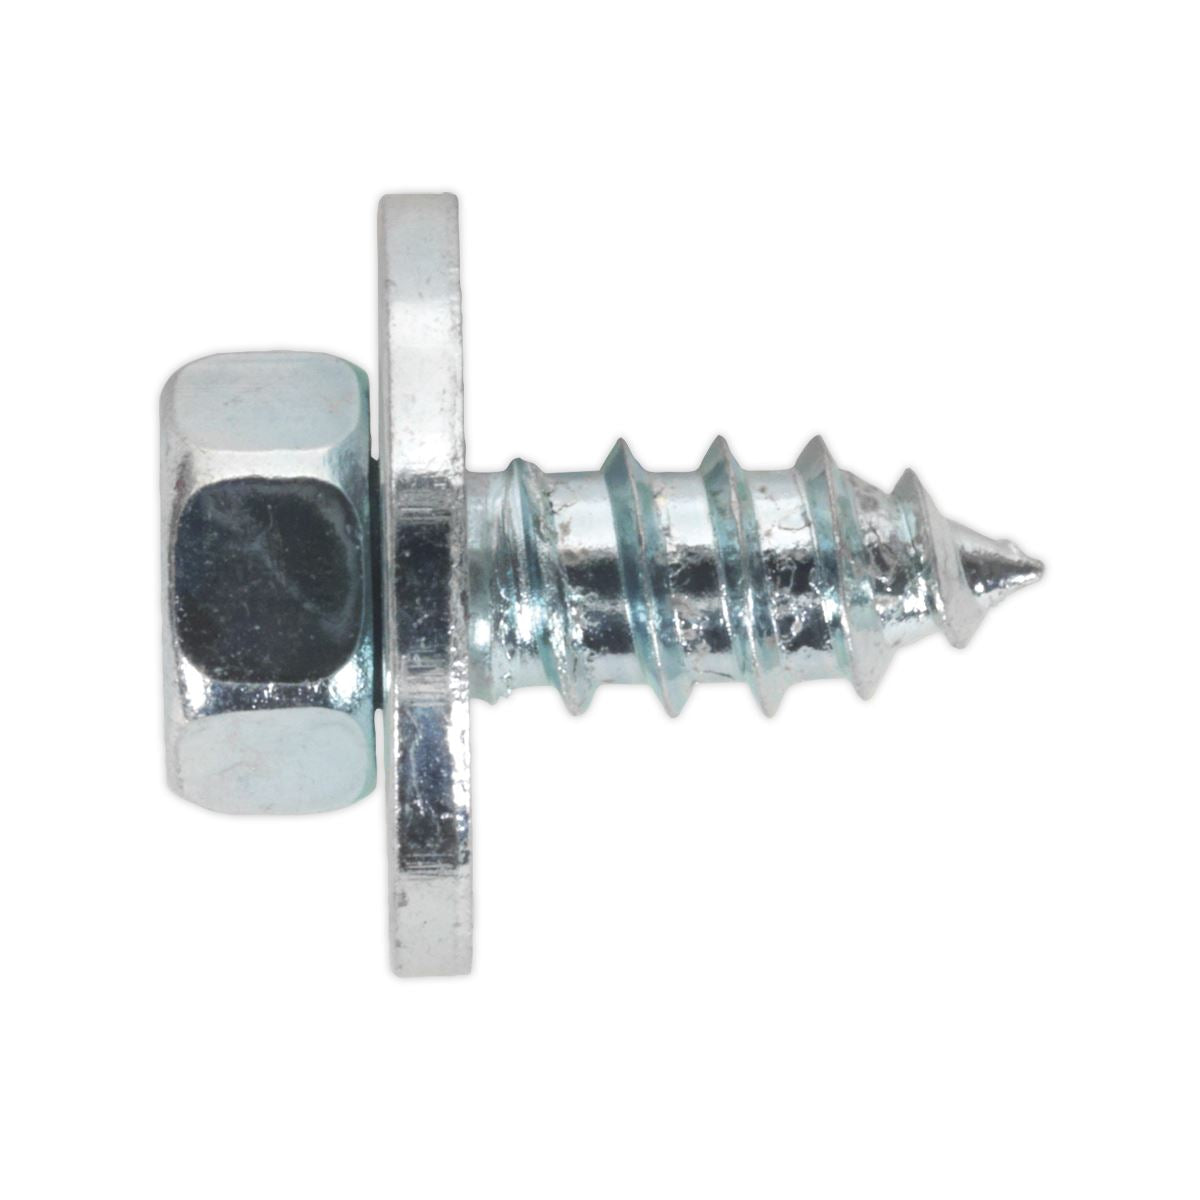 Sealey Acme Screw with Captive Washer #12 x 1/2" Zinc Pack of 50